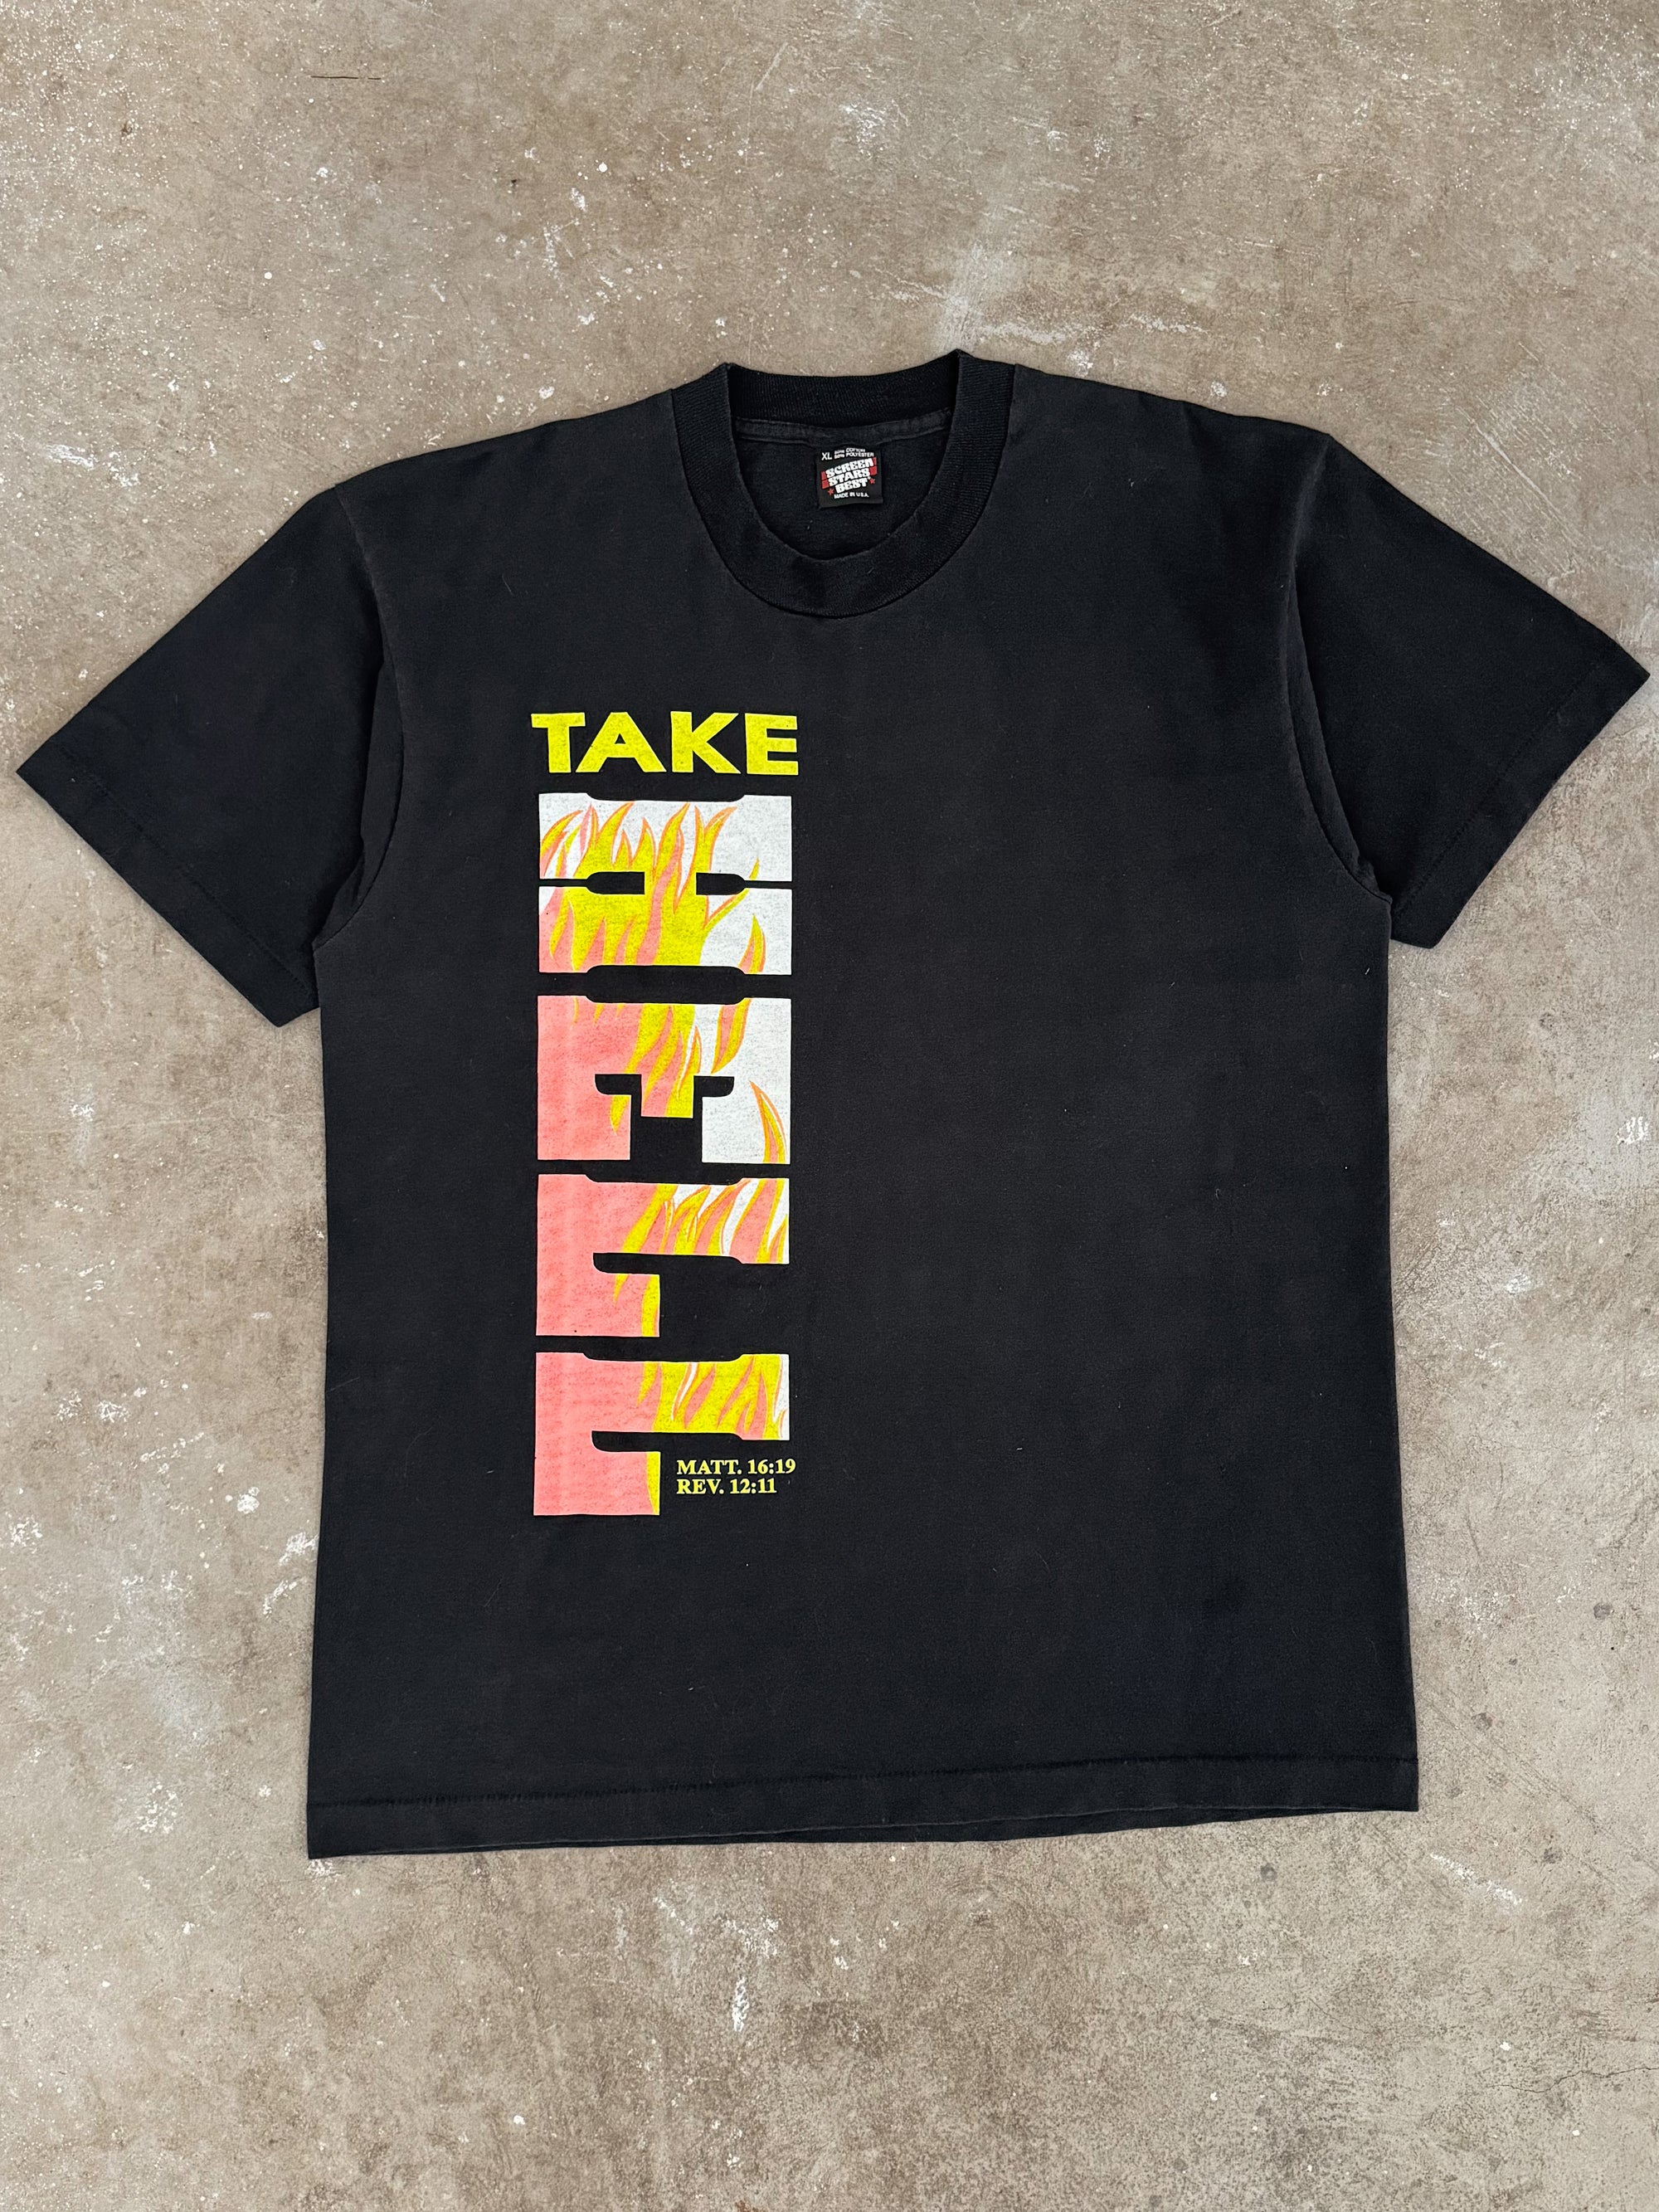 1980s/90s "Take Hell" Tee (L)